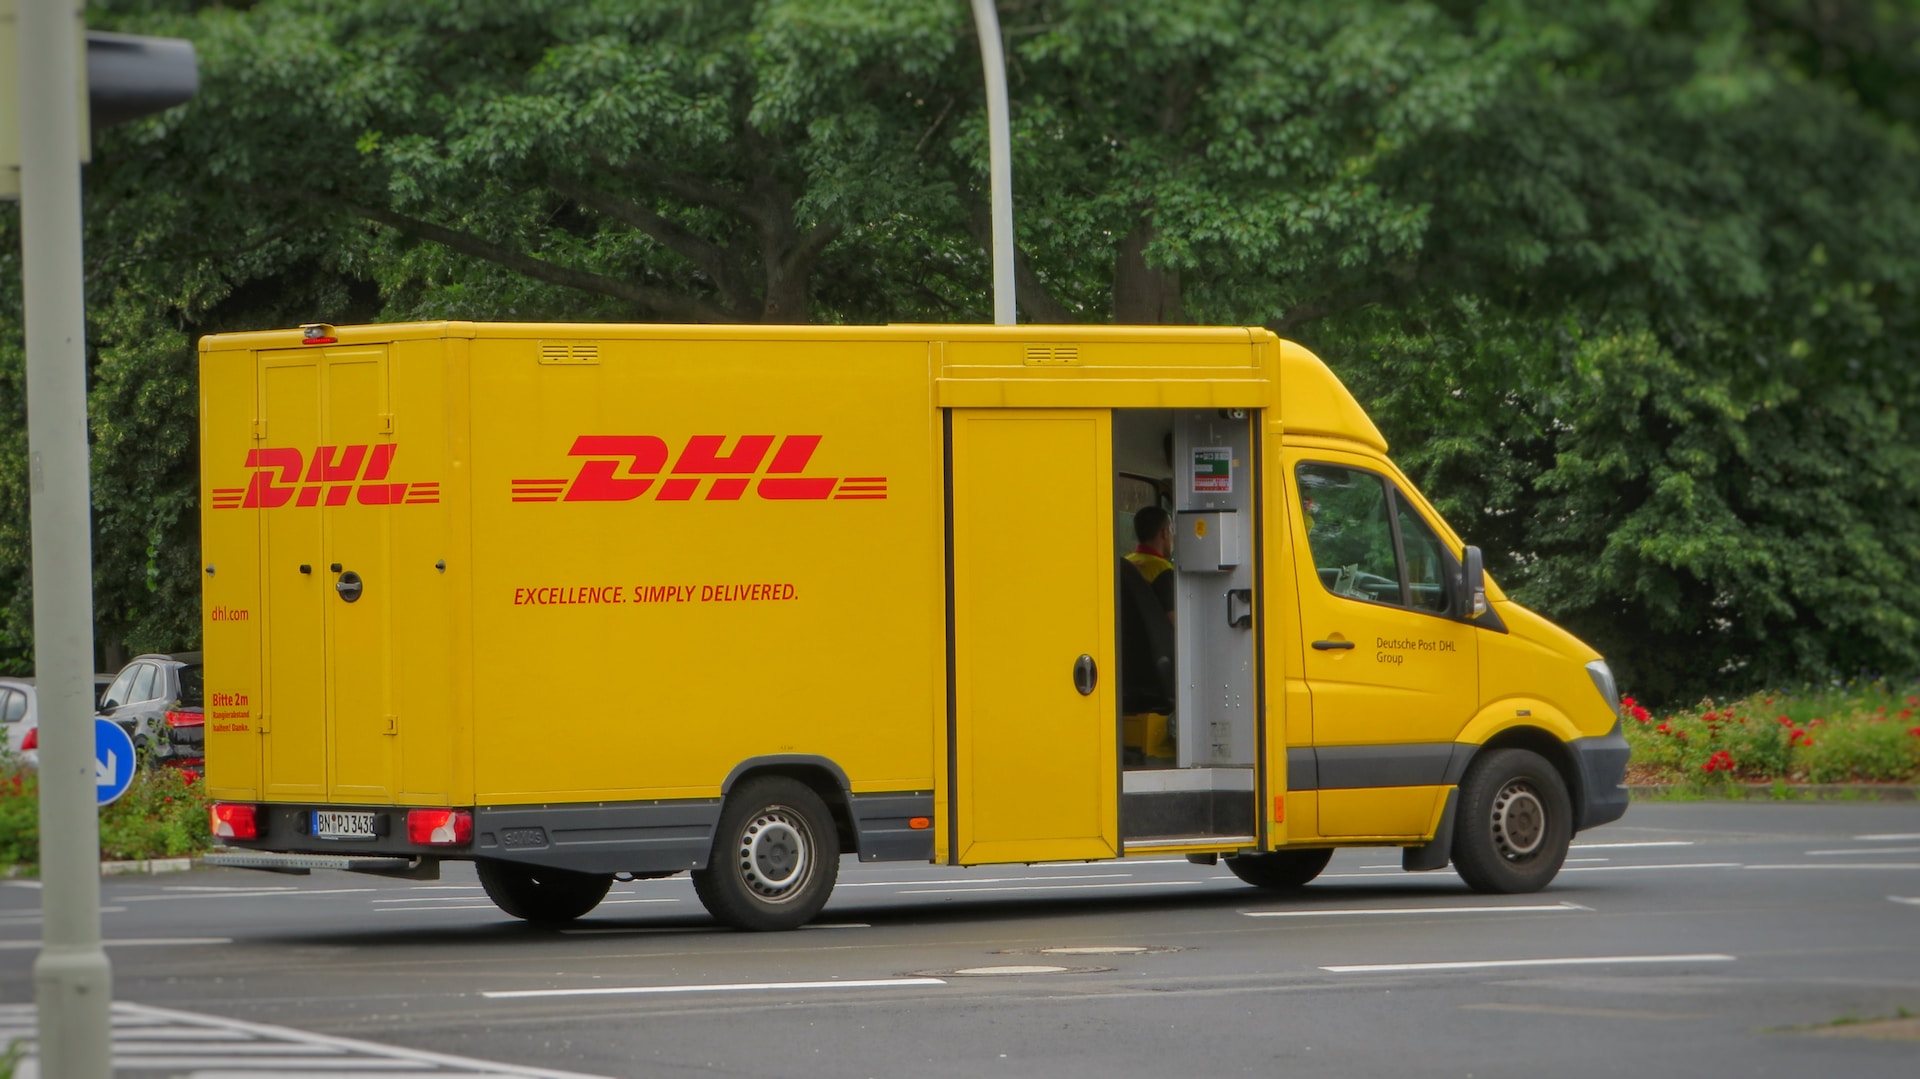 DHL Signature Release A Guide To The Powerful Service - PostageGuru -  Parcel And Mail Help